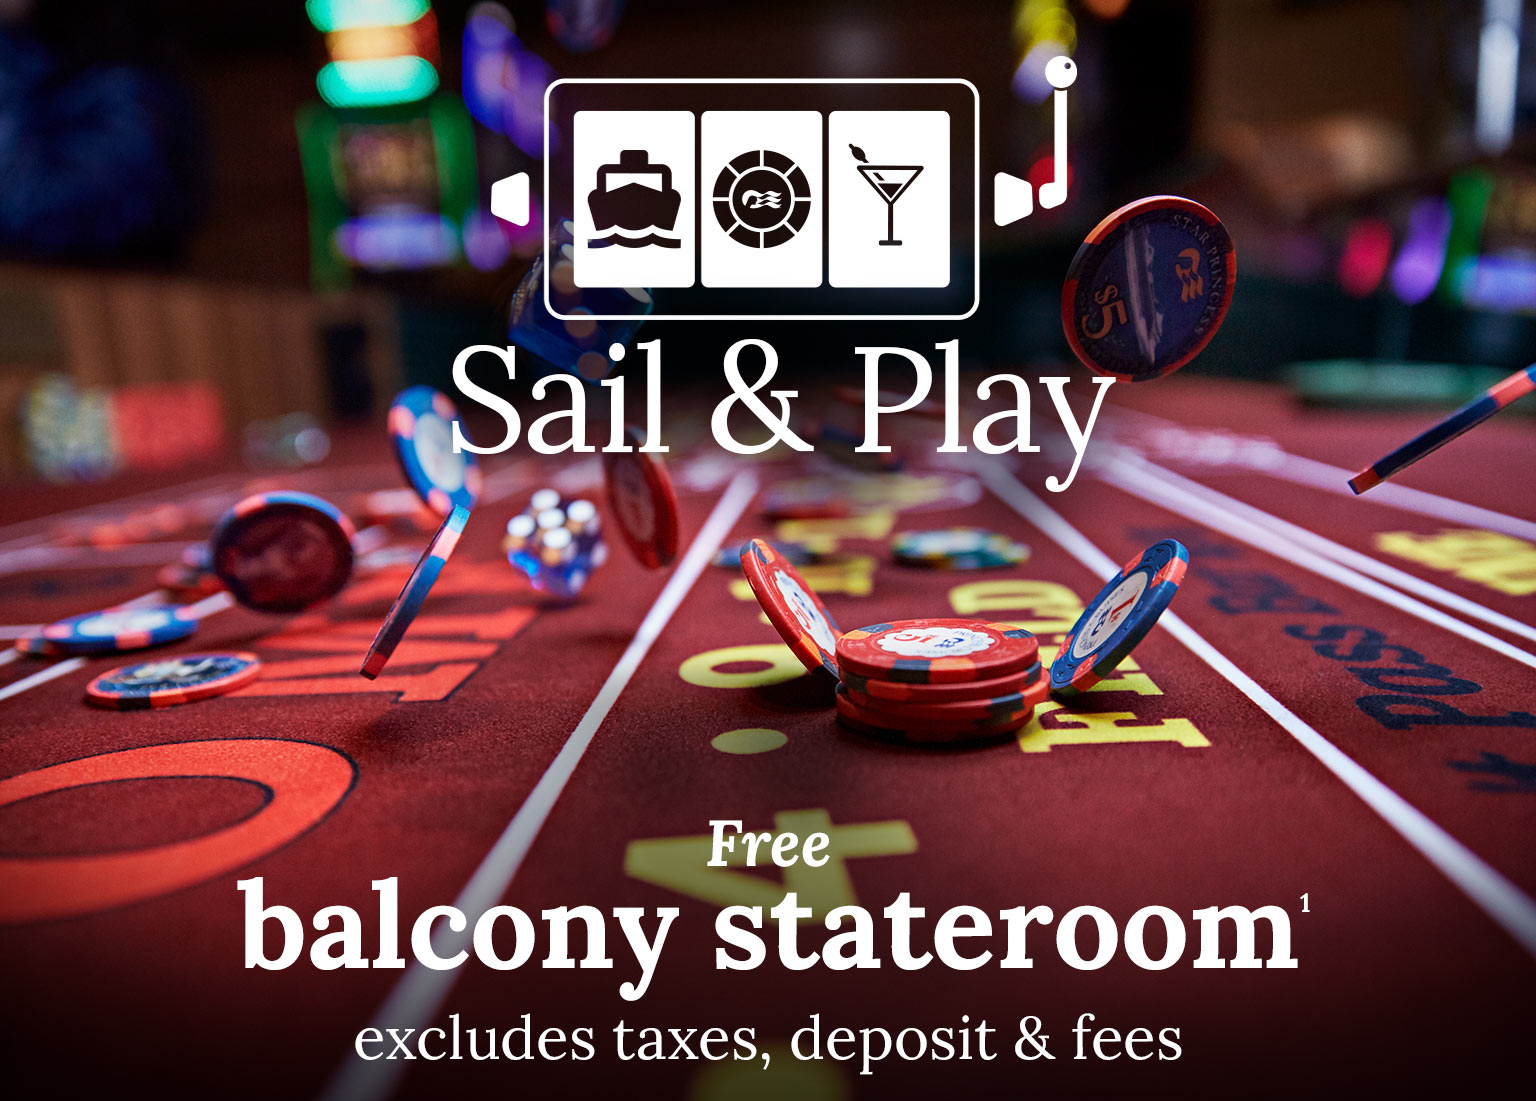 free balcony stateroom. Click here to book.